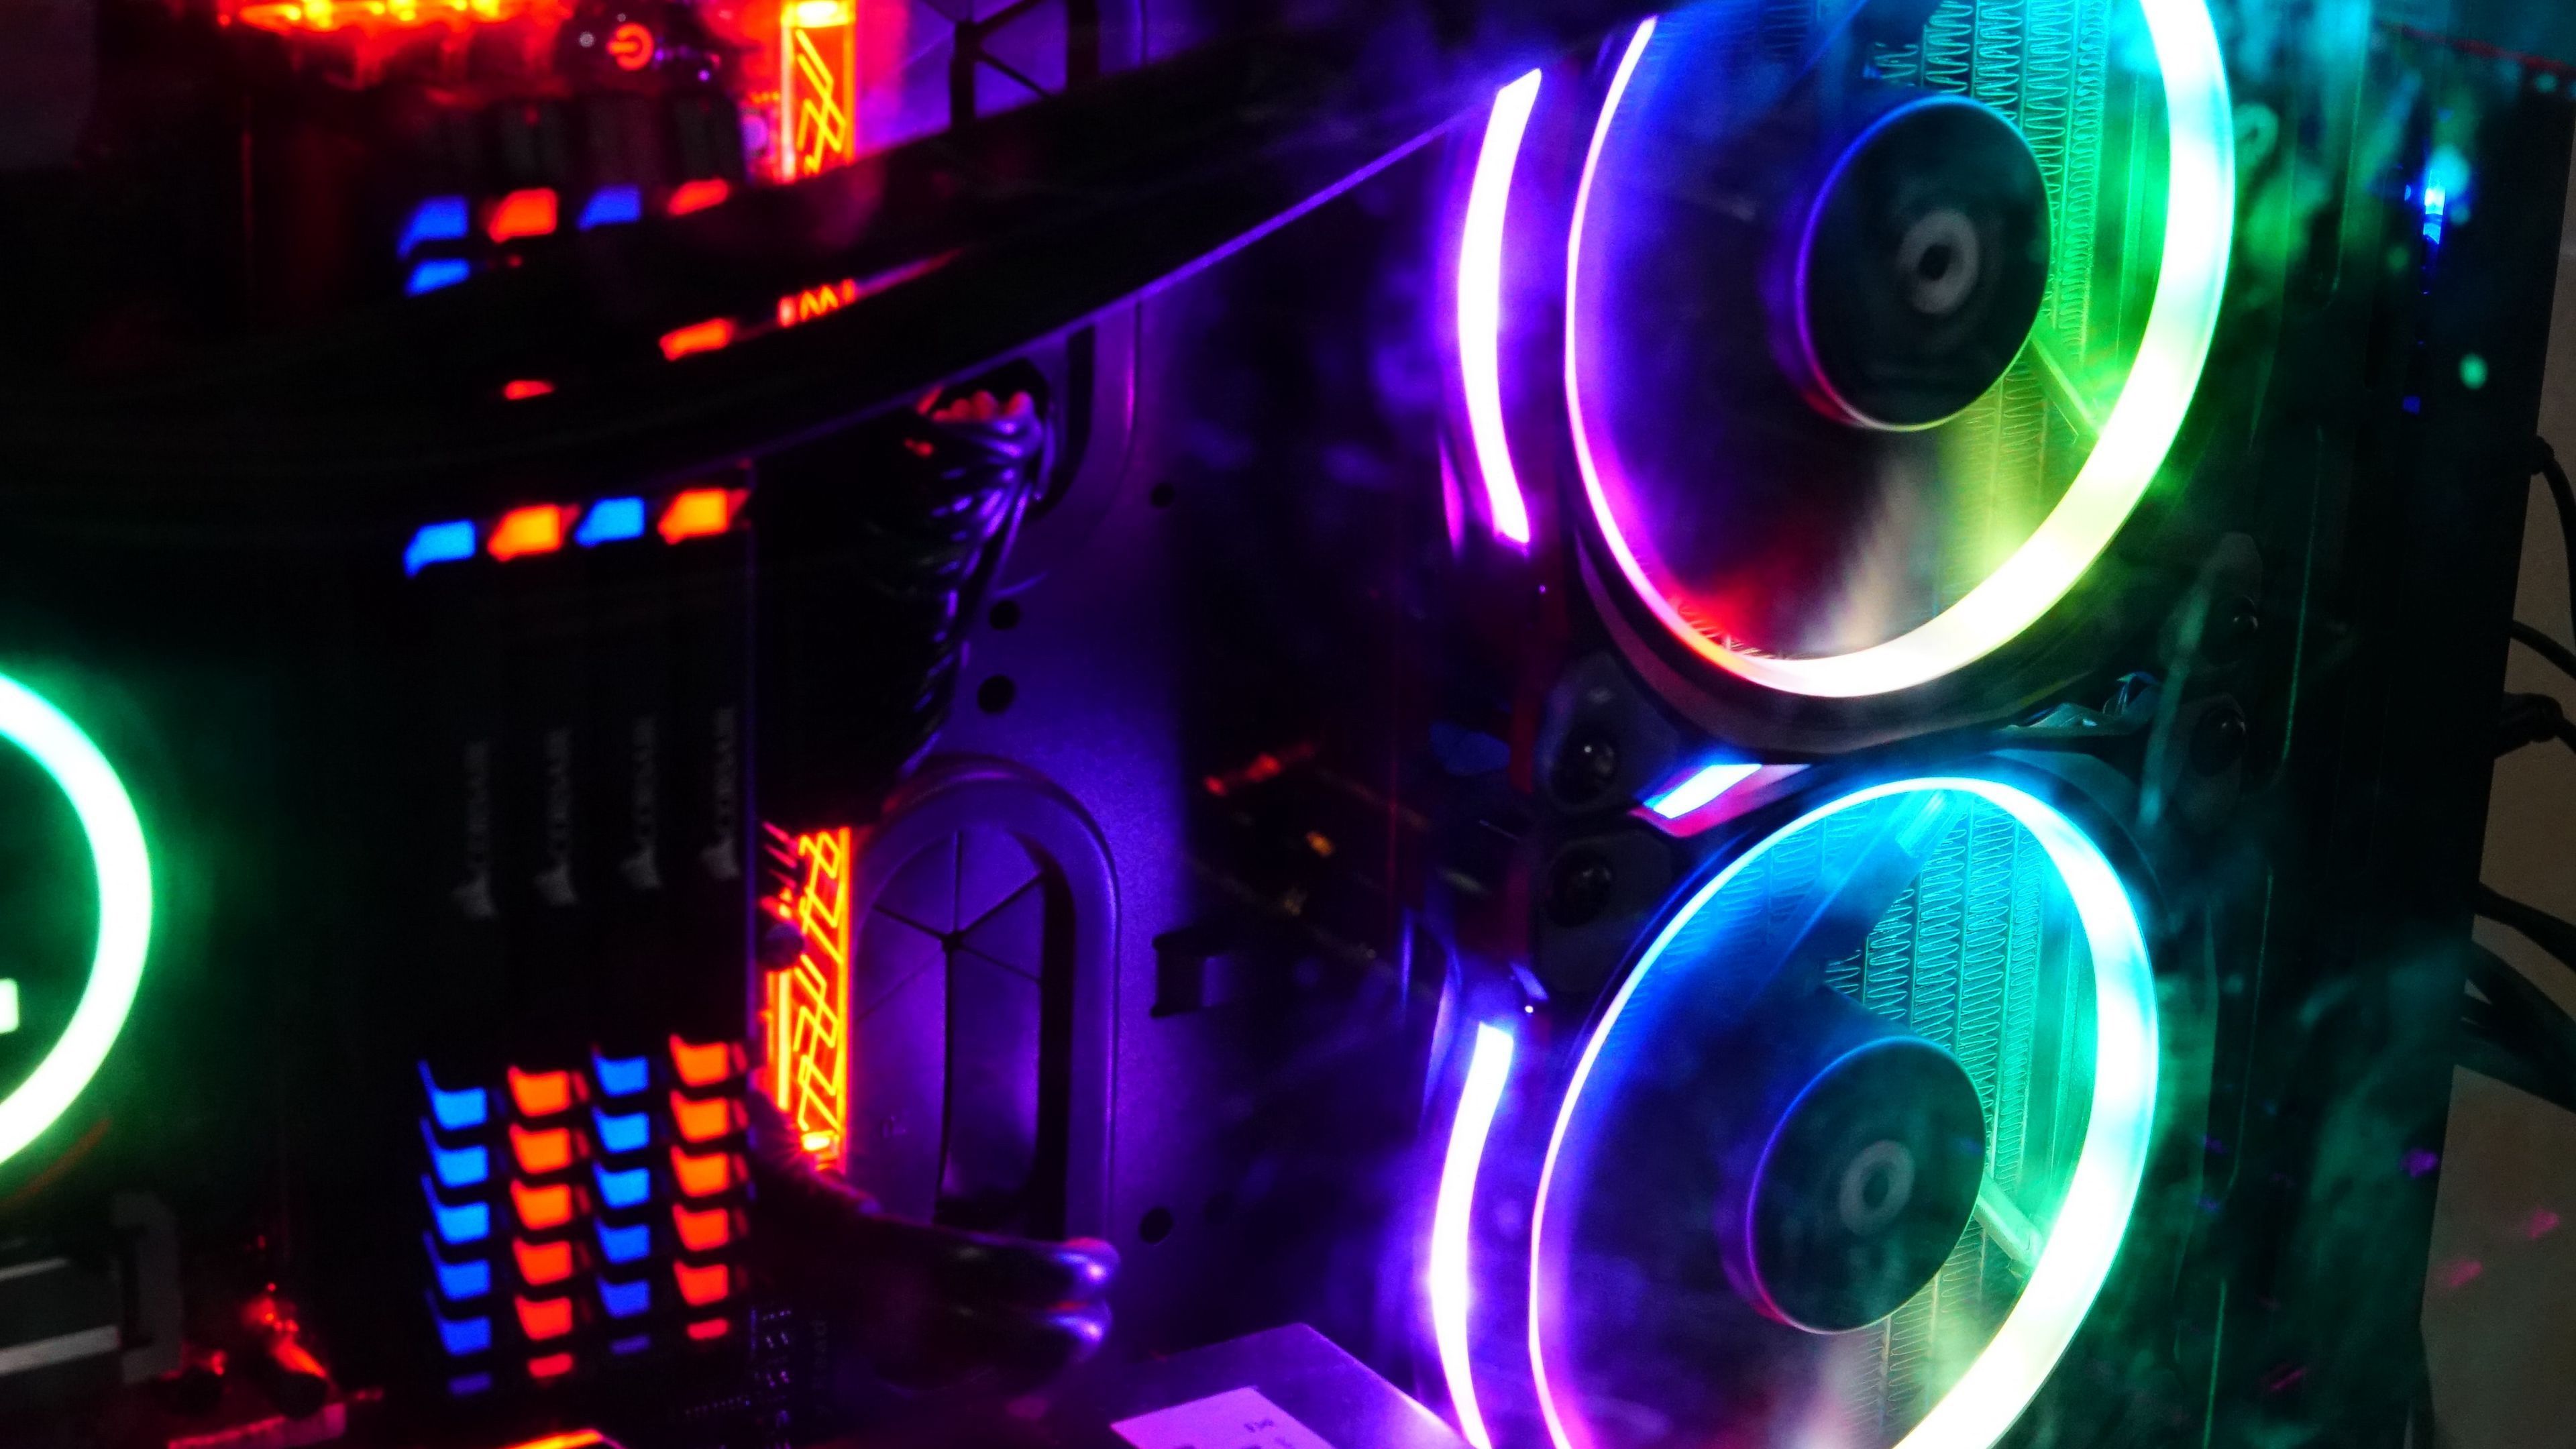 Download 3840x2160 Gaming Rig, Rgb Colors, Neon, Coolers, Rams Wallpaper for UHD TV